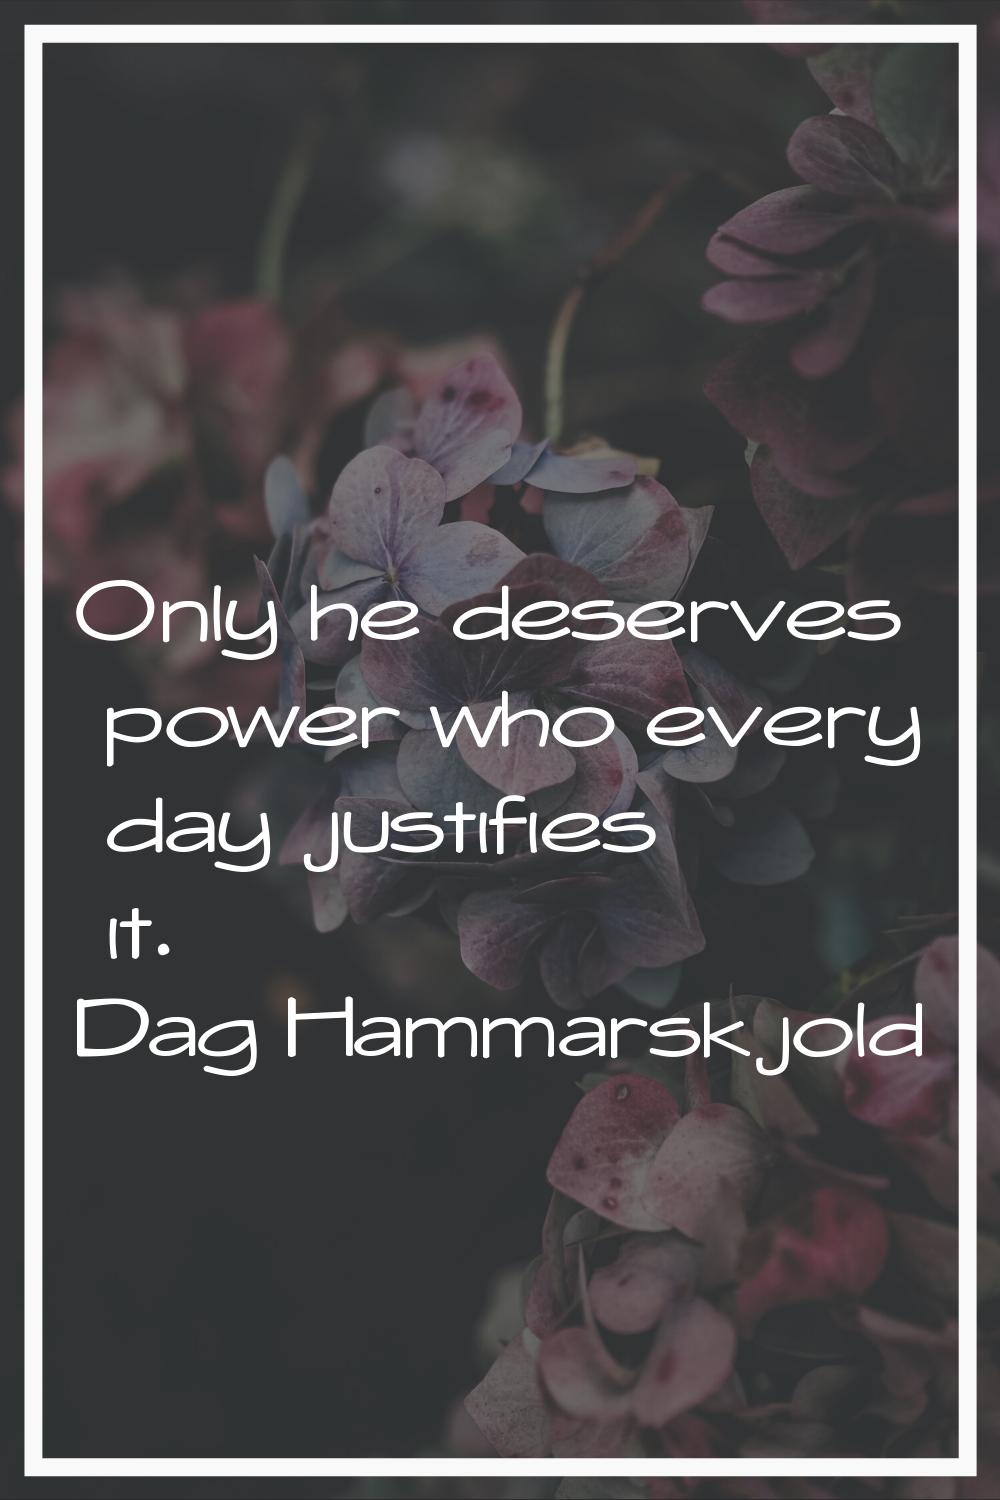 Only he deserves power who every day justifies it.